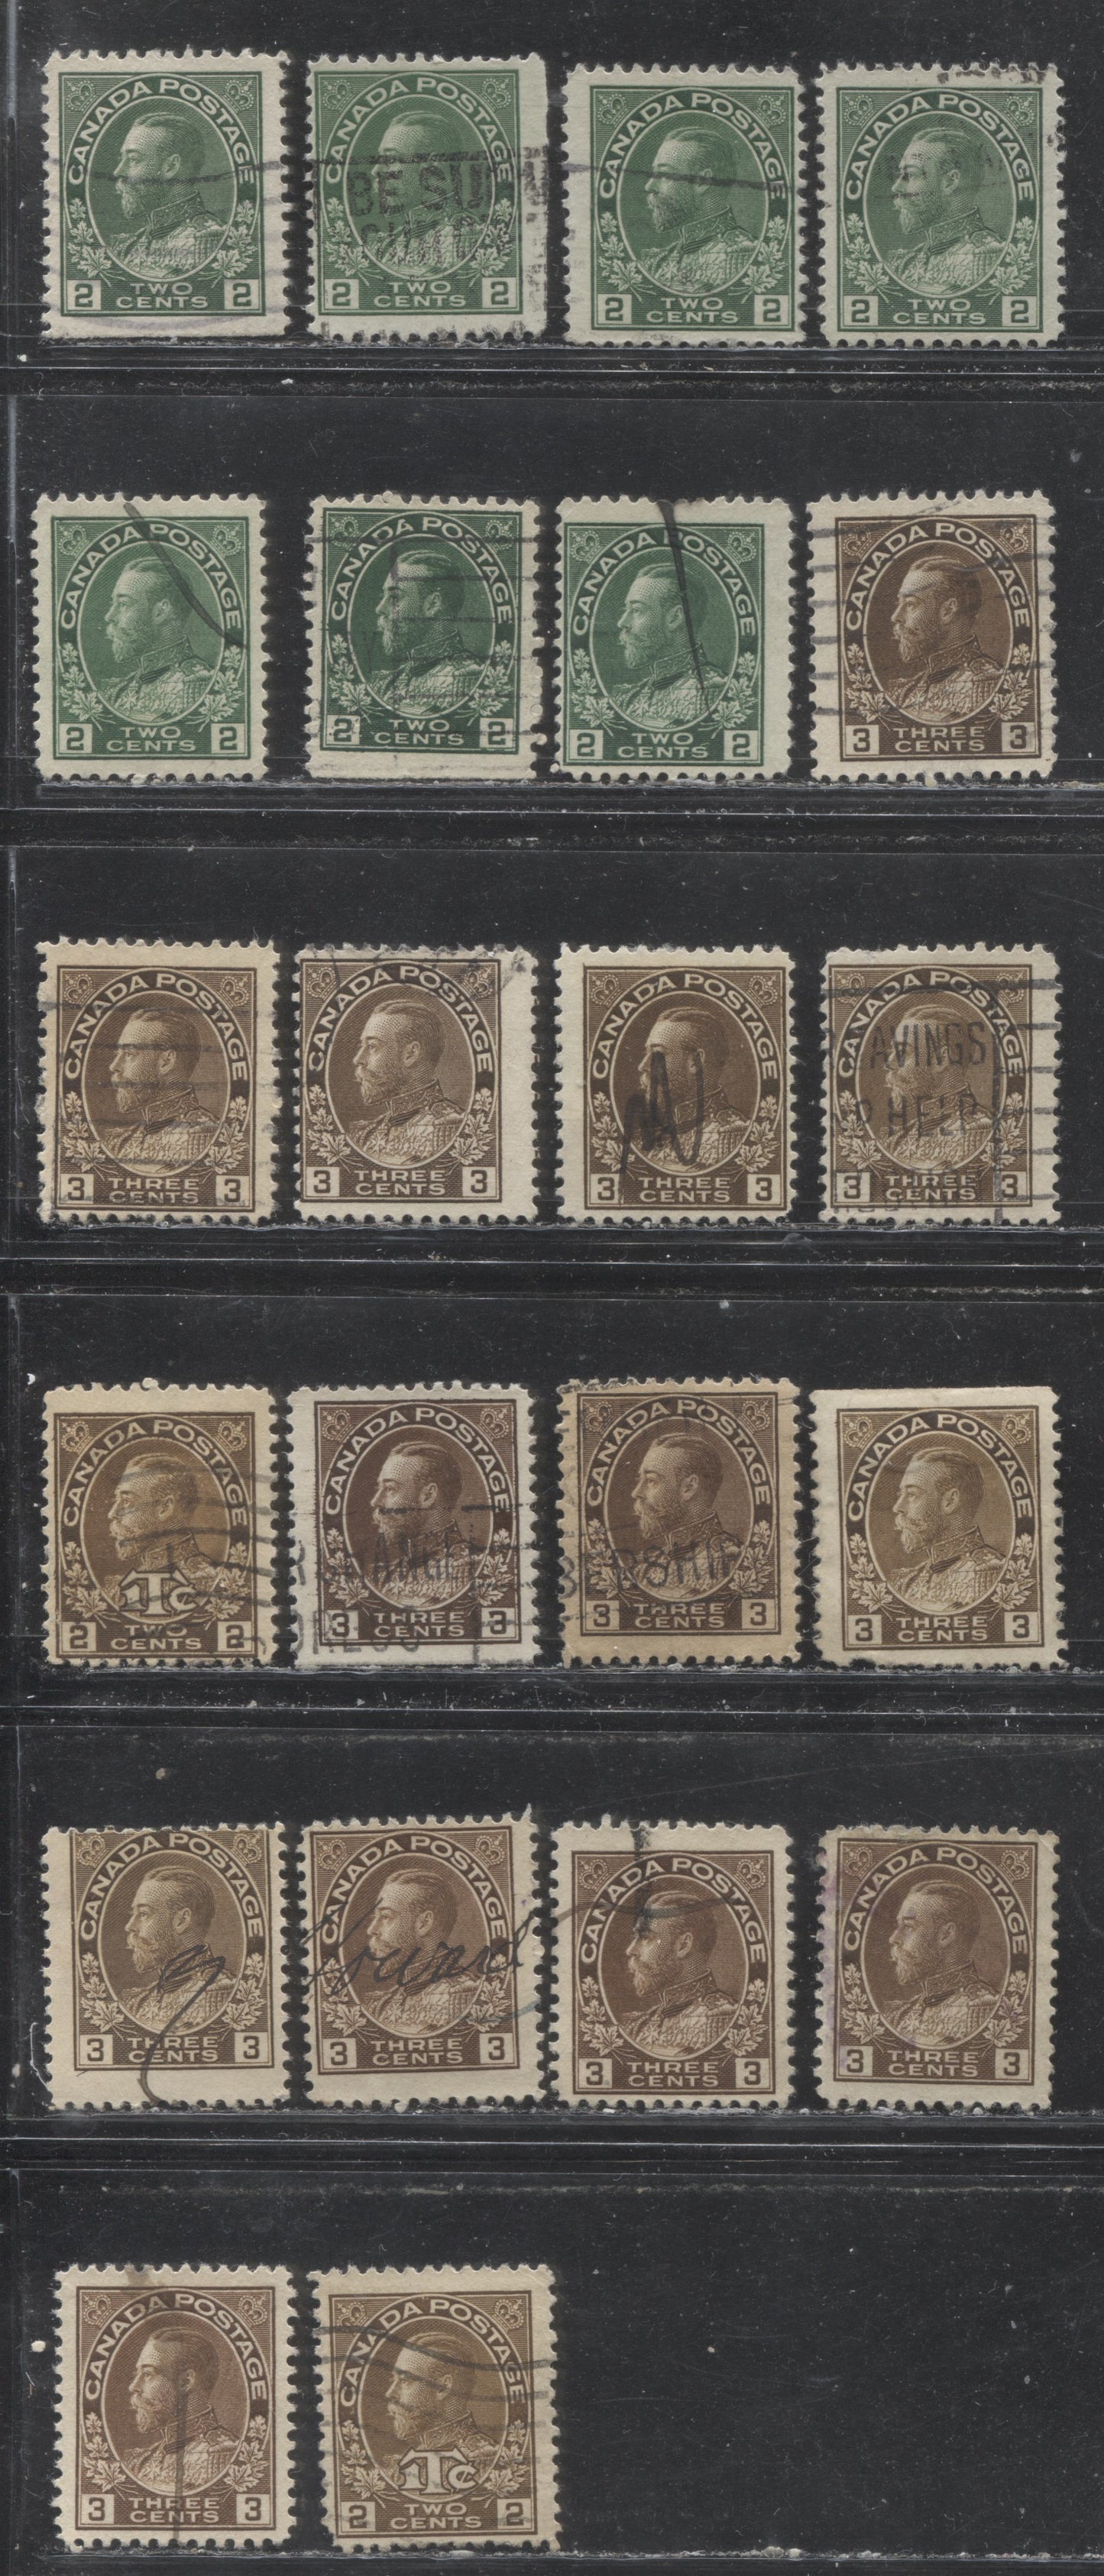 Lot 140 Canada #107-ii, 108-c, MR4 2c, 3c & 2c + 1c Yellow Green & Brown King George V, 1911-1928 Admiral & War Tax Issue, 22 Mostly VG Singles, Shade Reference Lot